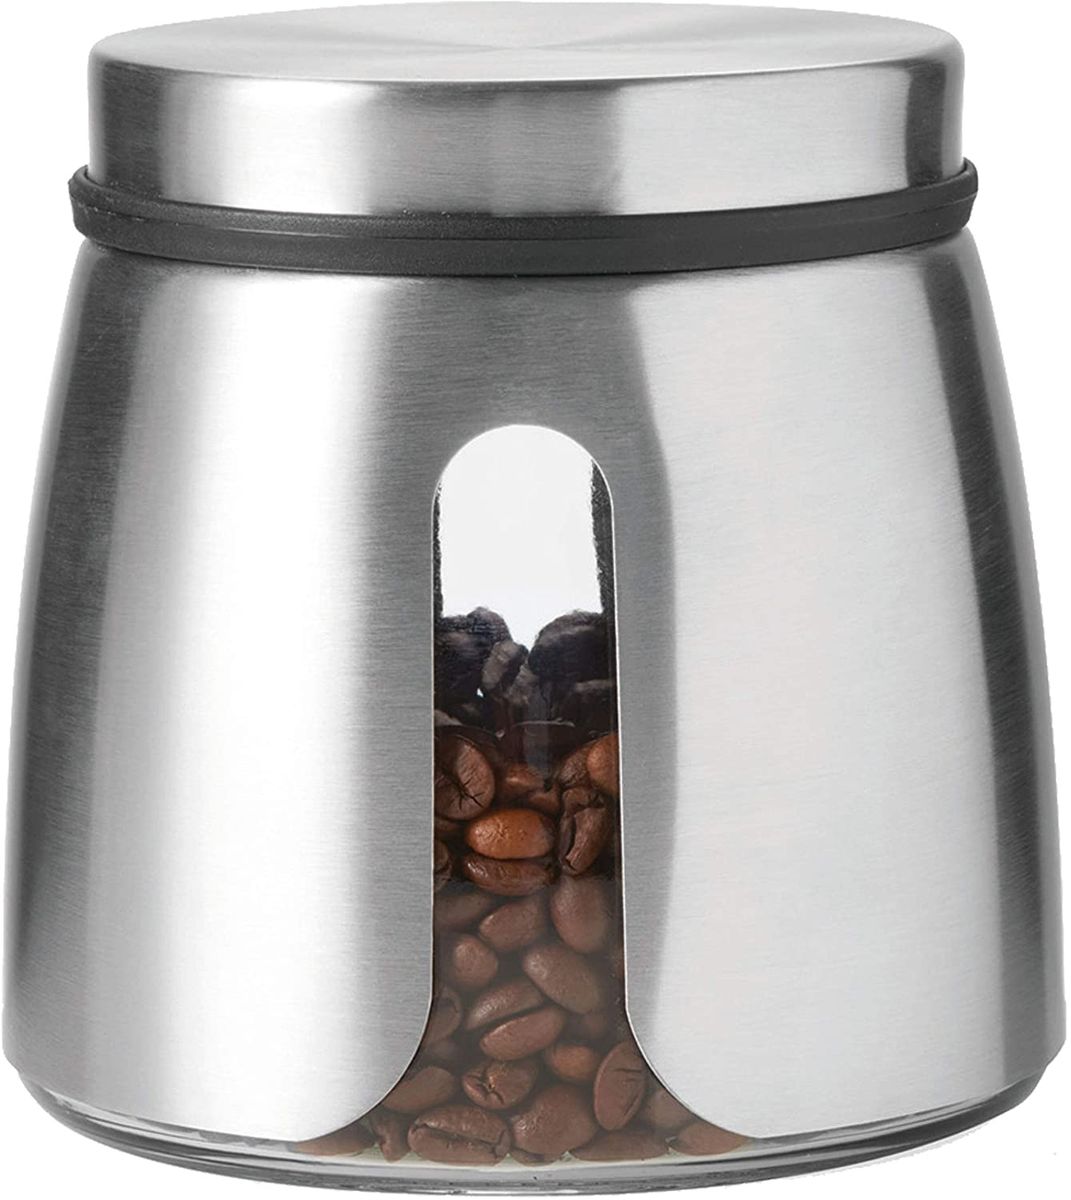 Montana 057230 Canning Jar Round Glass, Stainless Steel Stainless Steel